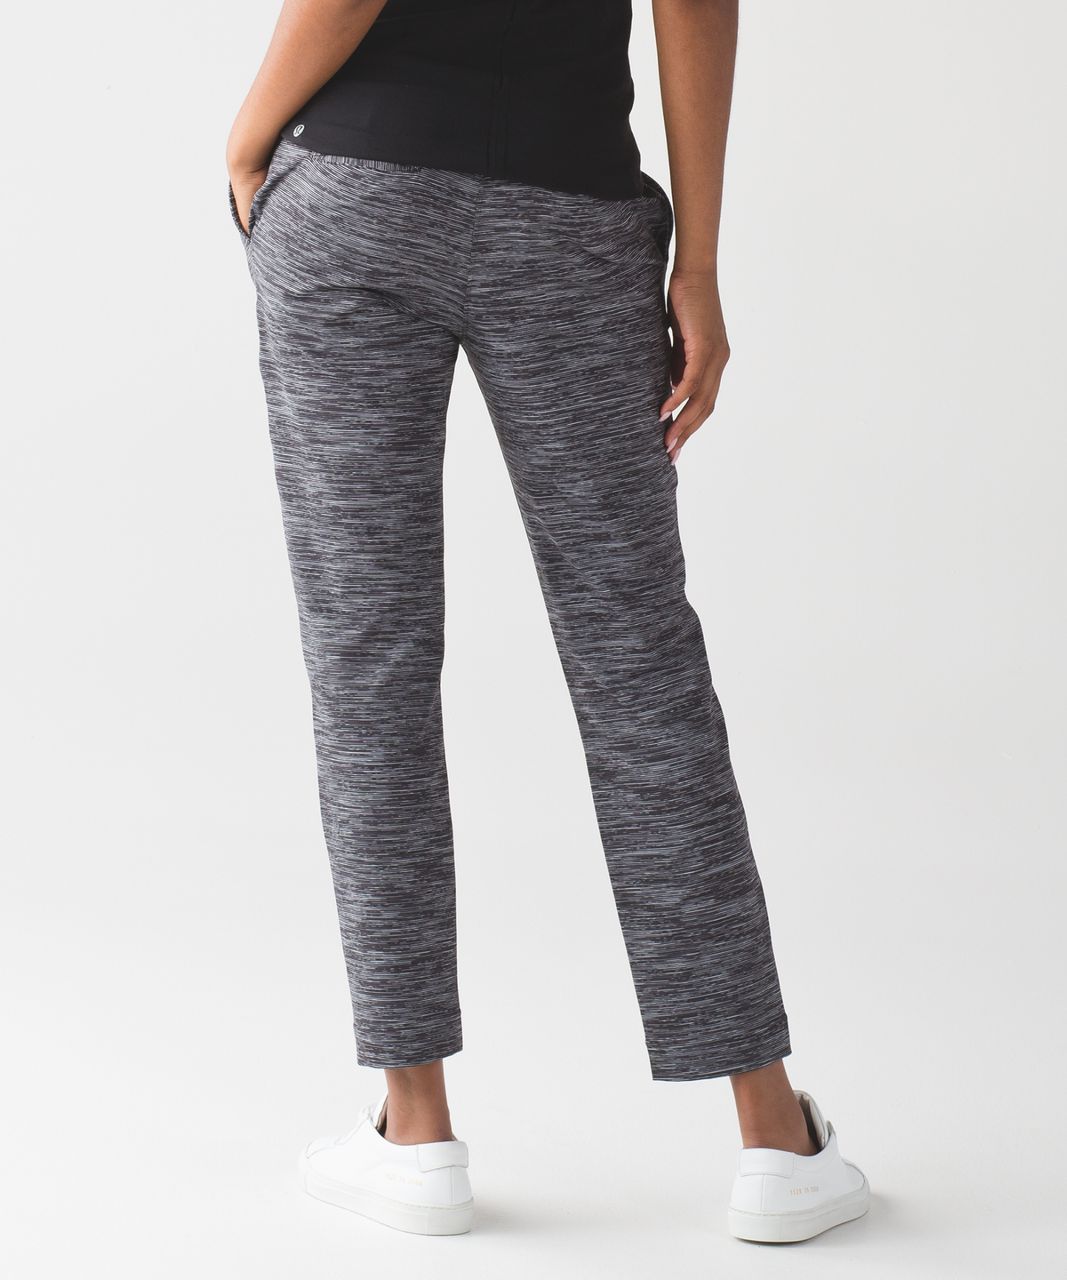 lululemon Astro Pant Grey Wee are From Space Strip